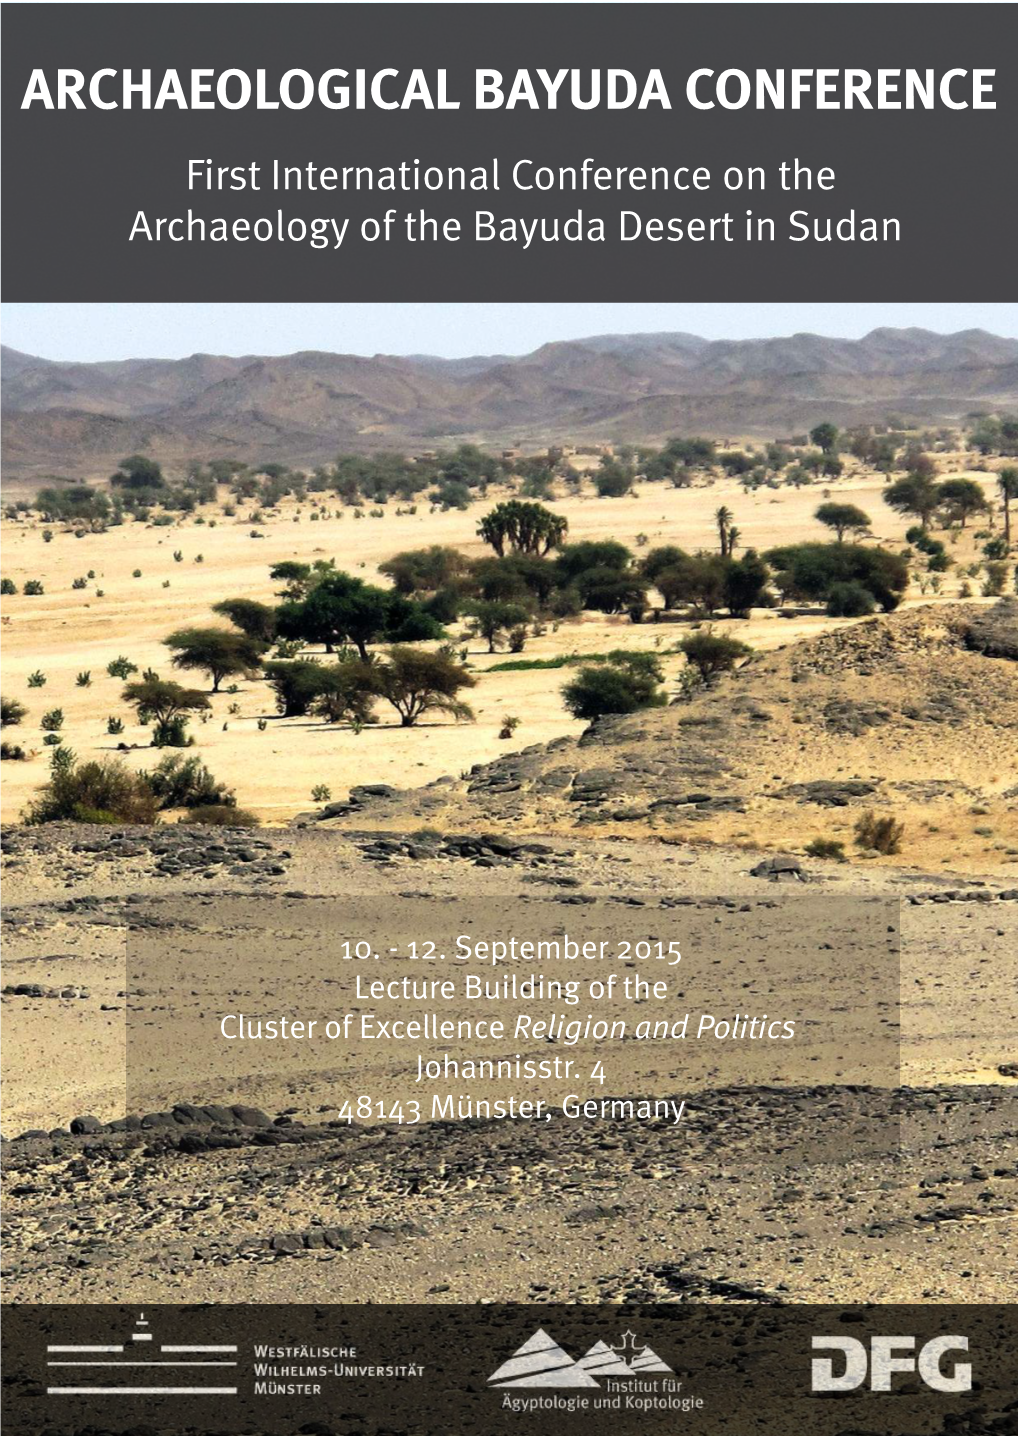 ARCHAEOLOGICAL BAYUDA CONFERENCE First International Conference on the Archaeology of the Bayuda Desert in Sudan